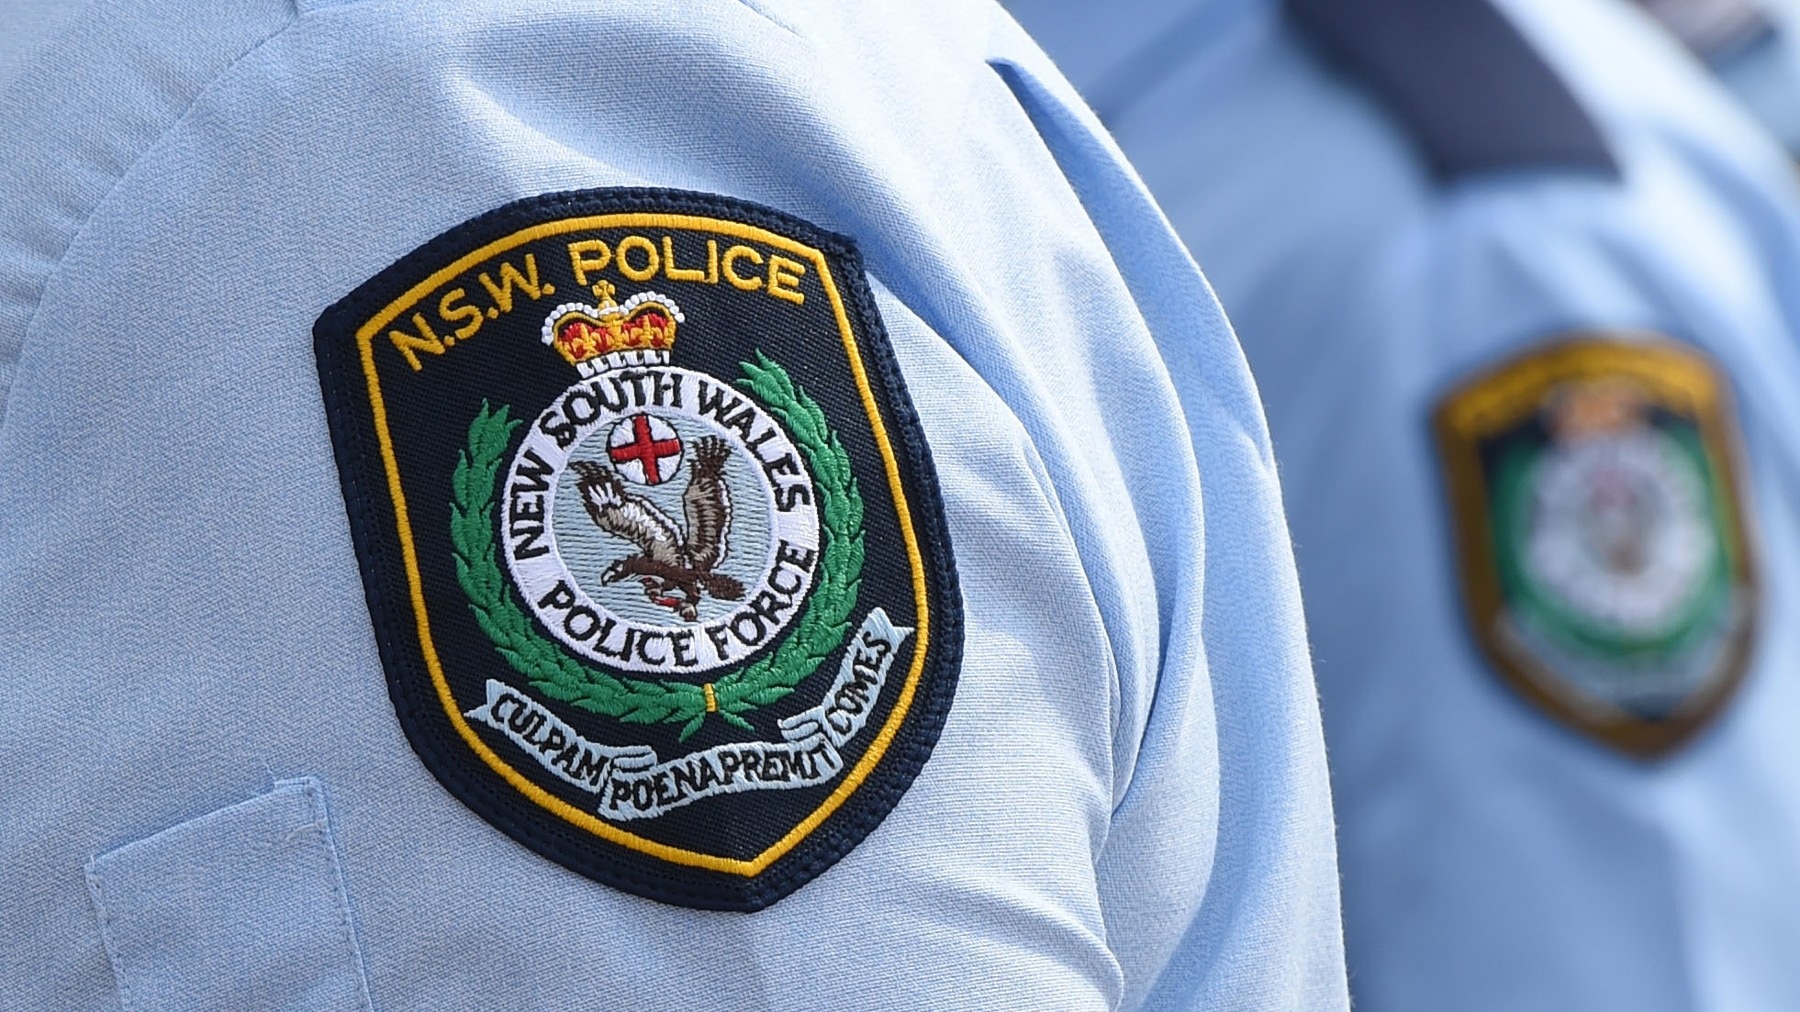 New South Wales Police badge.